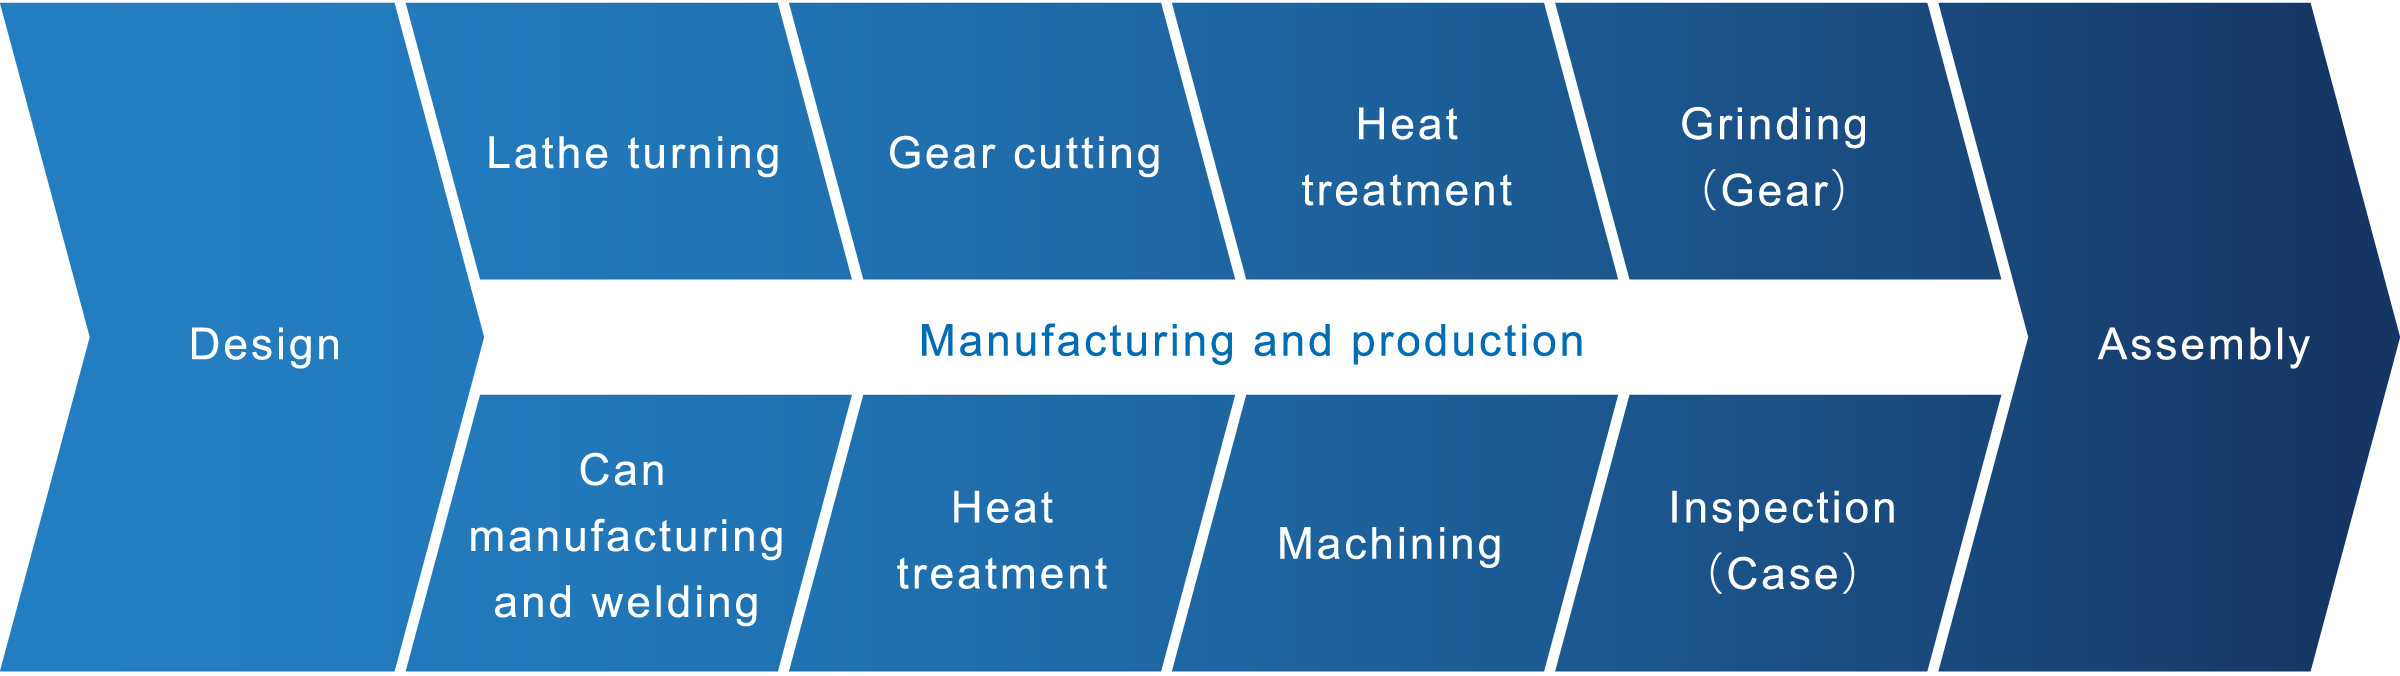 Design / Manufacturing and production / Assembly,Lathe turning / Gear cutting / Heat treatment / Grinding(Gear),Can manufacturing and welding / Heat treatment / Machining / Inspection(Case)